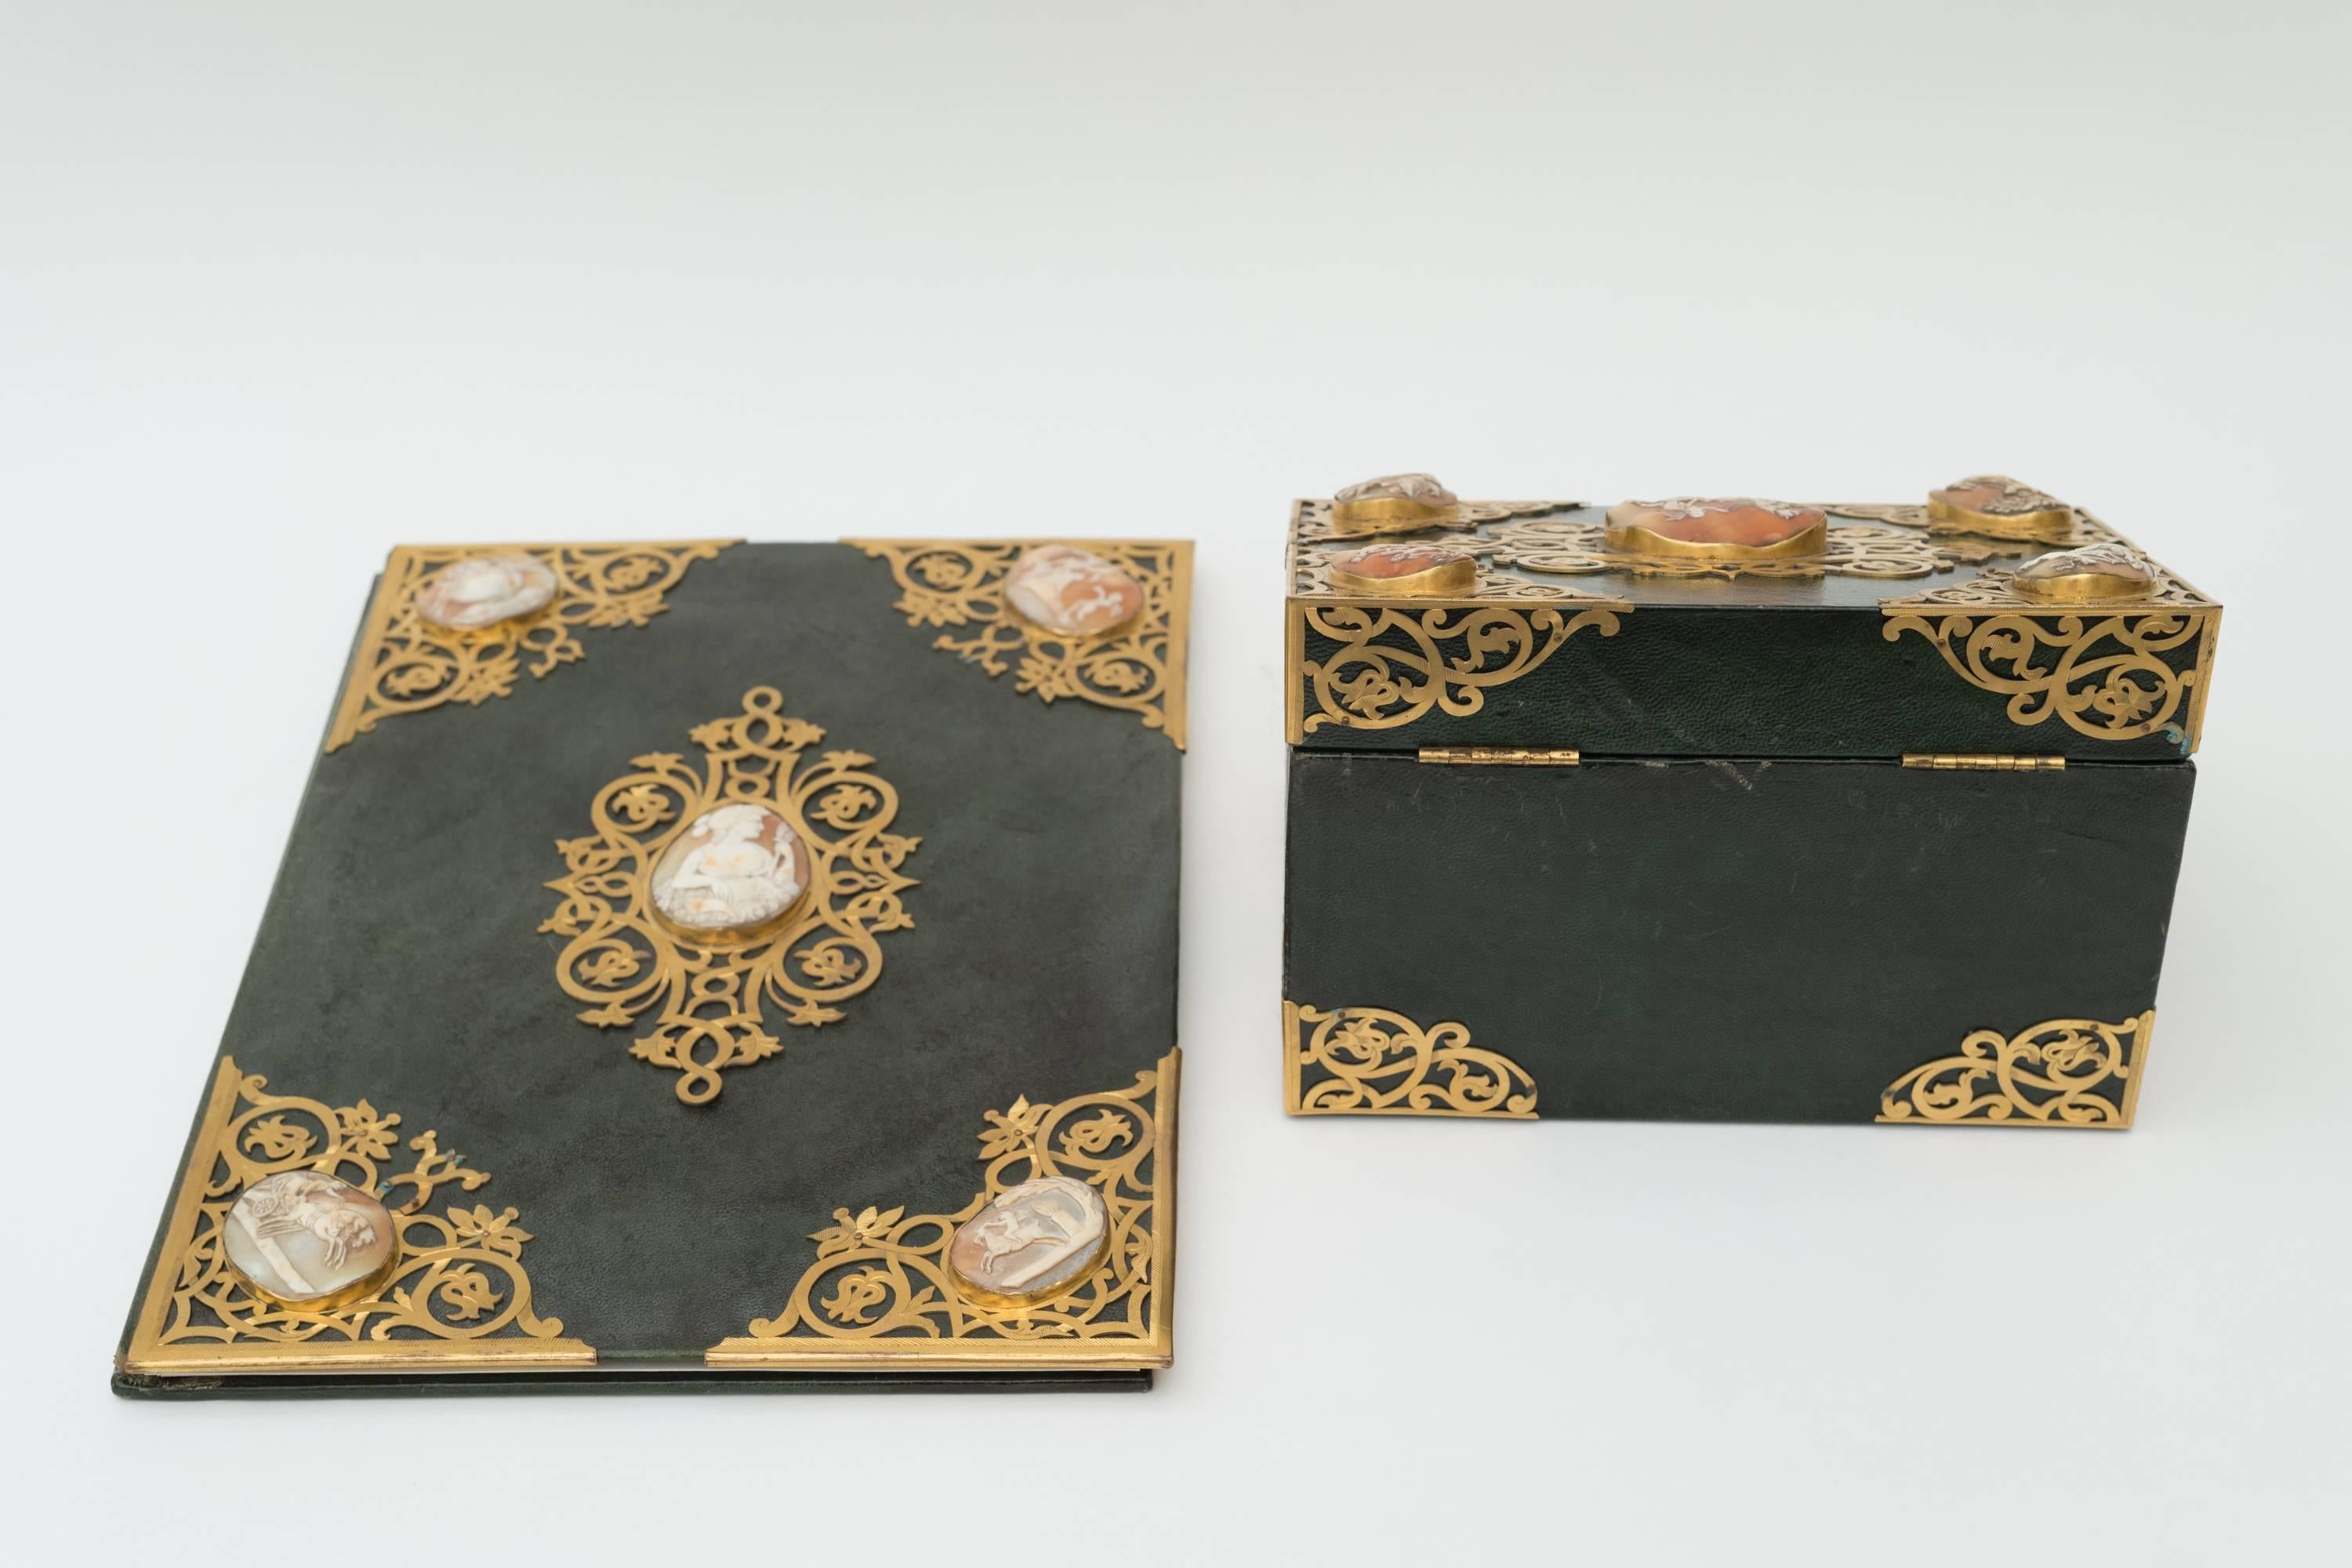 A Victoria green leather bound writing box and blotter
Each with five mounted cameos mounted within gilded borders and centrepieces 

Measures: Blotter width 25cm, length 35.75cm, depth 3 cm 
Writing box width 22 cm, depth 15 cm, height 16.5